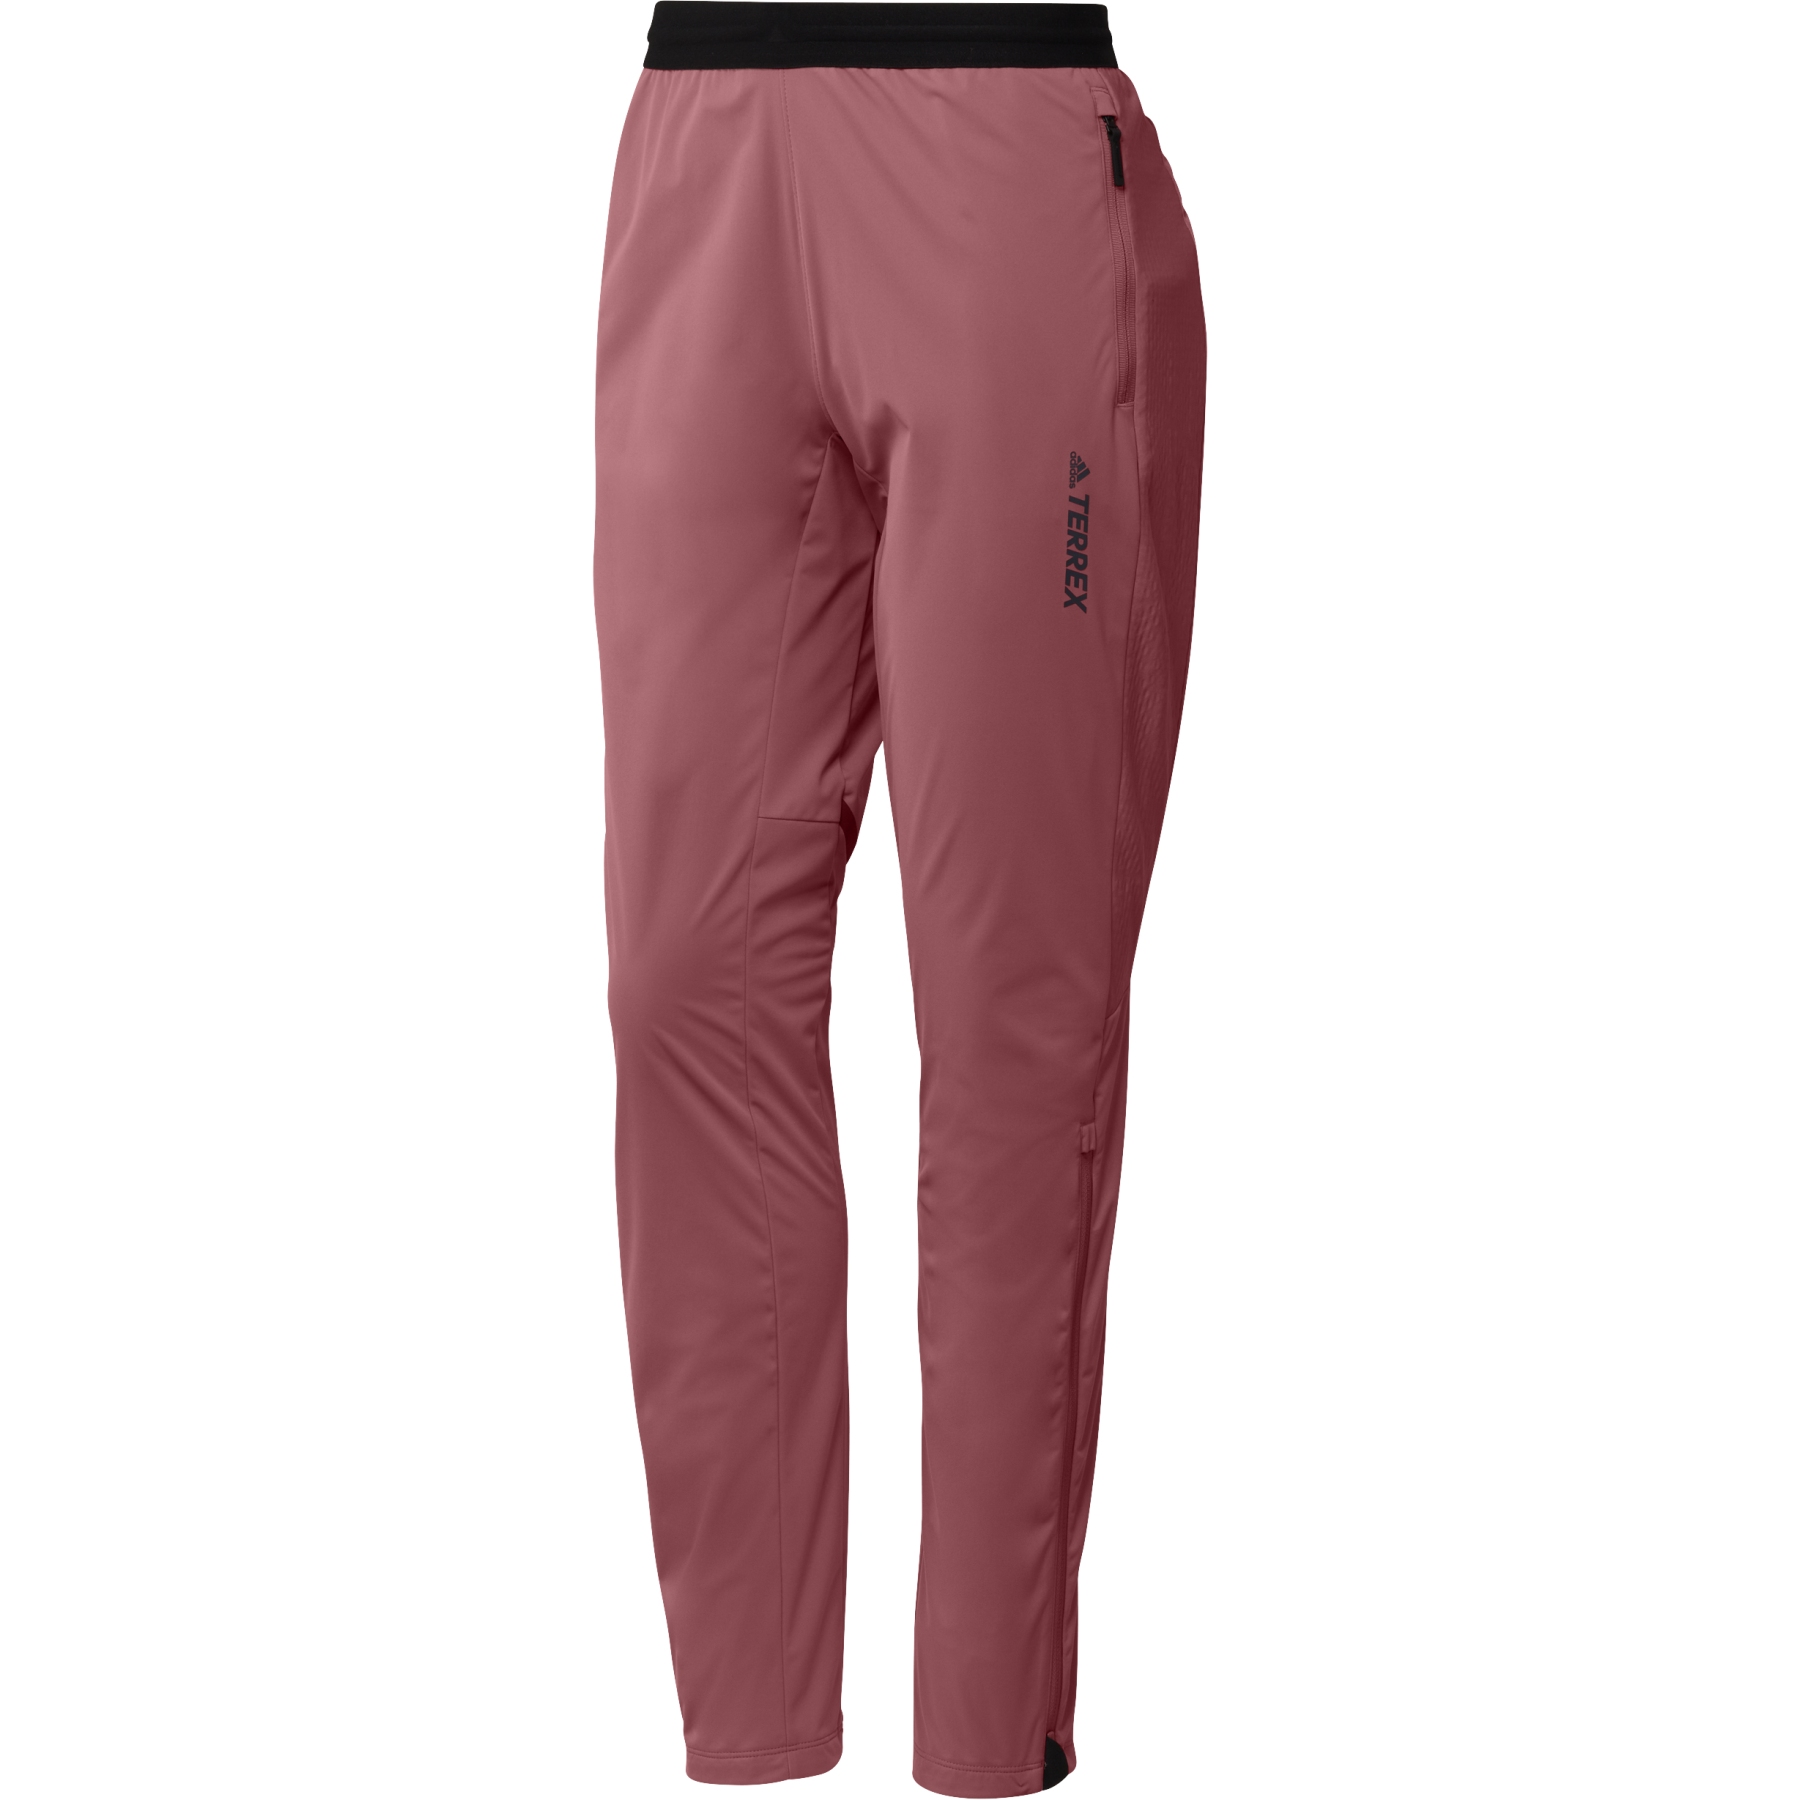 Picture of adidas TERREX Xperior Soft Shell Cross-Country Pants Women - wonder red HI1324